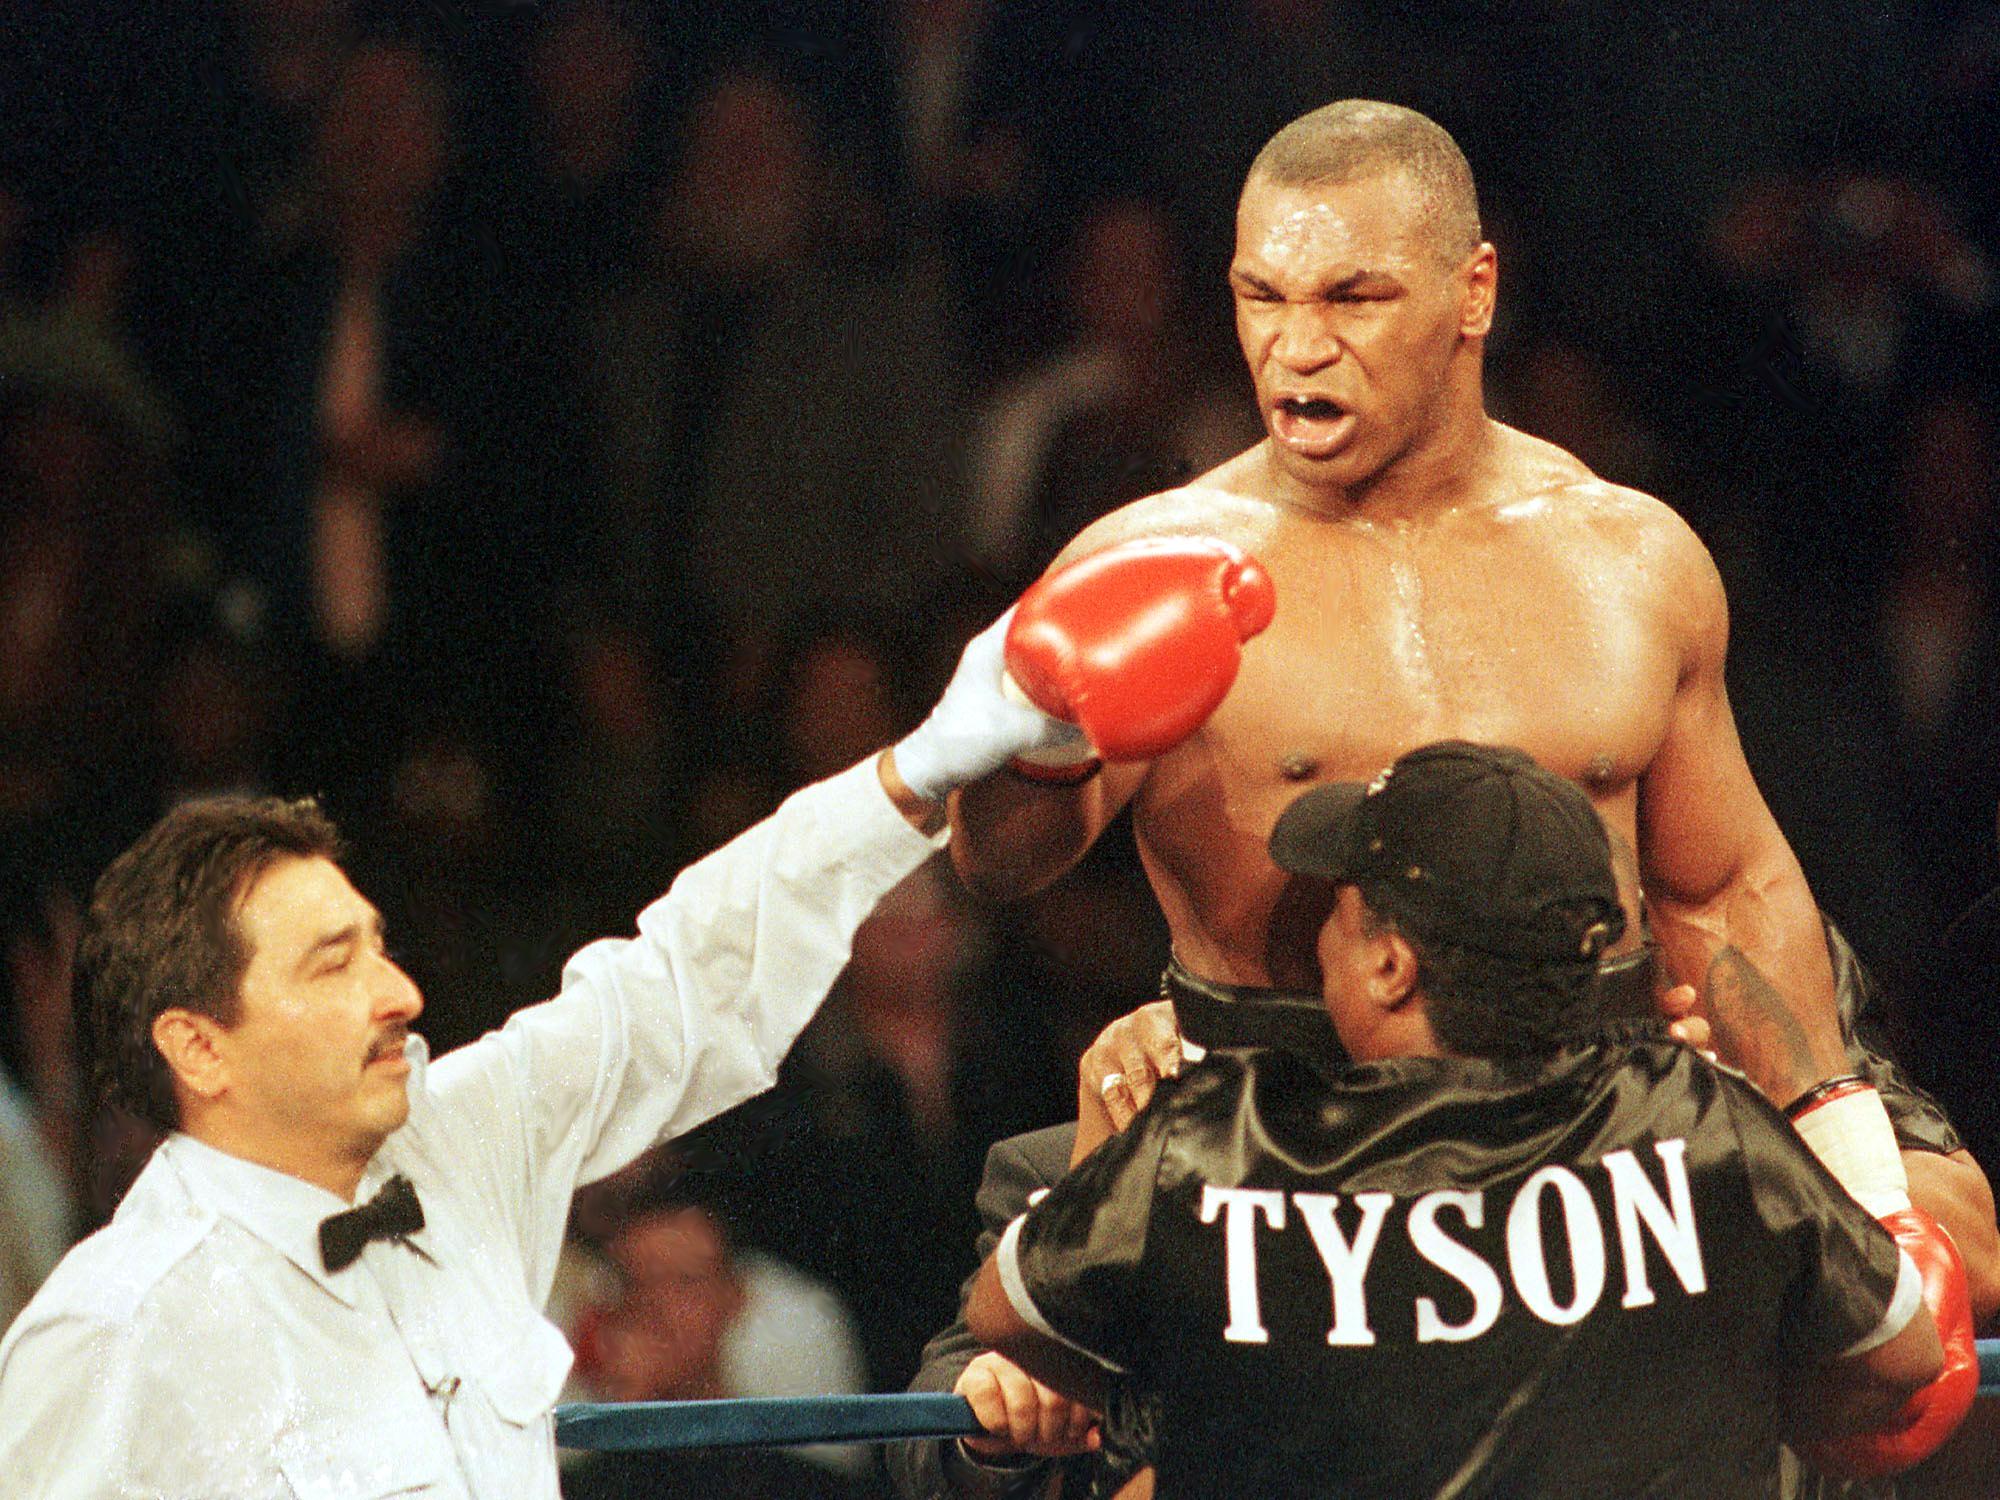 Mike Tyson said there weren't many positives about his childhood.